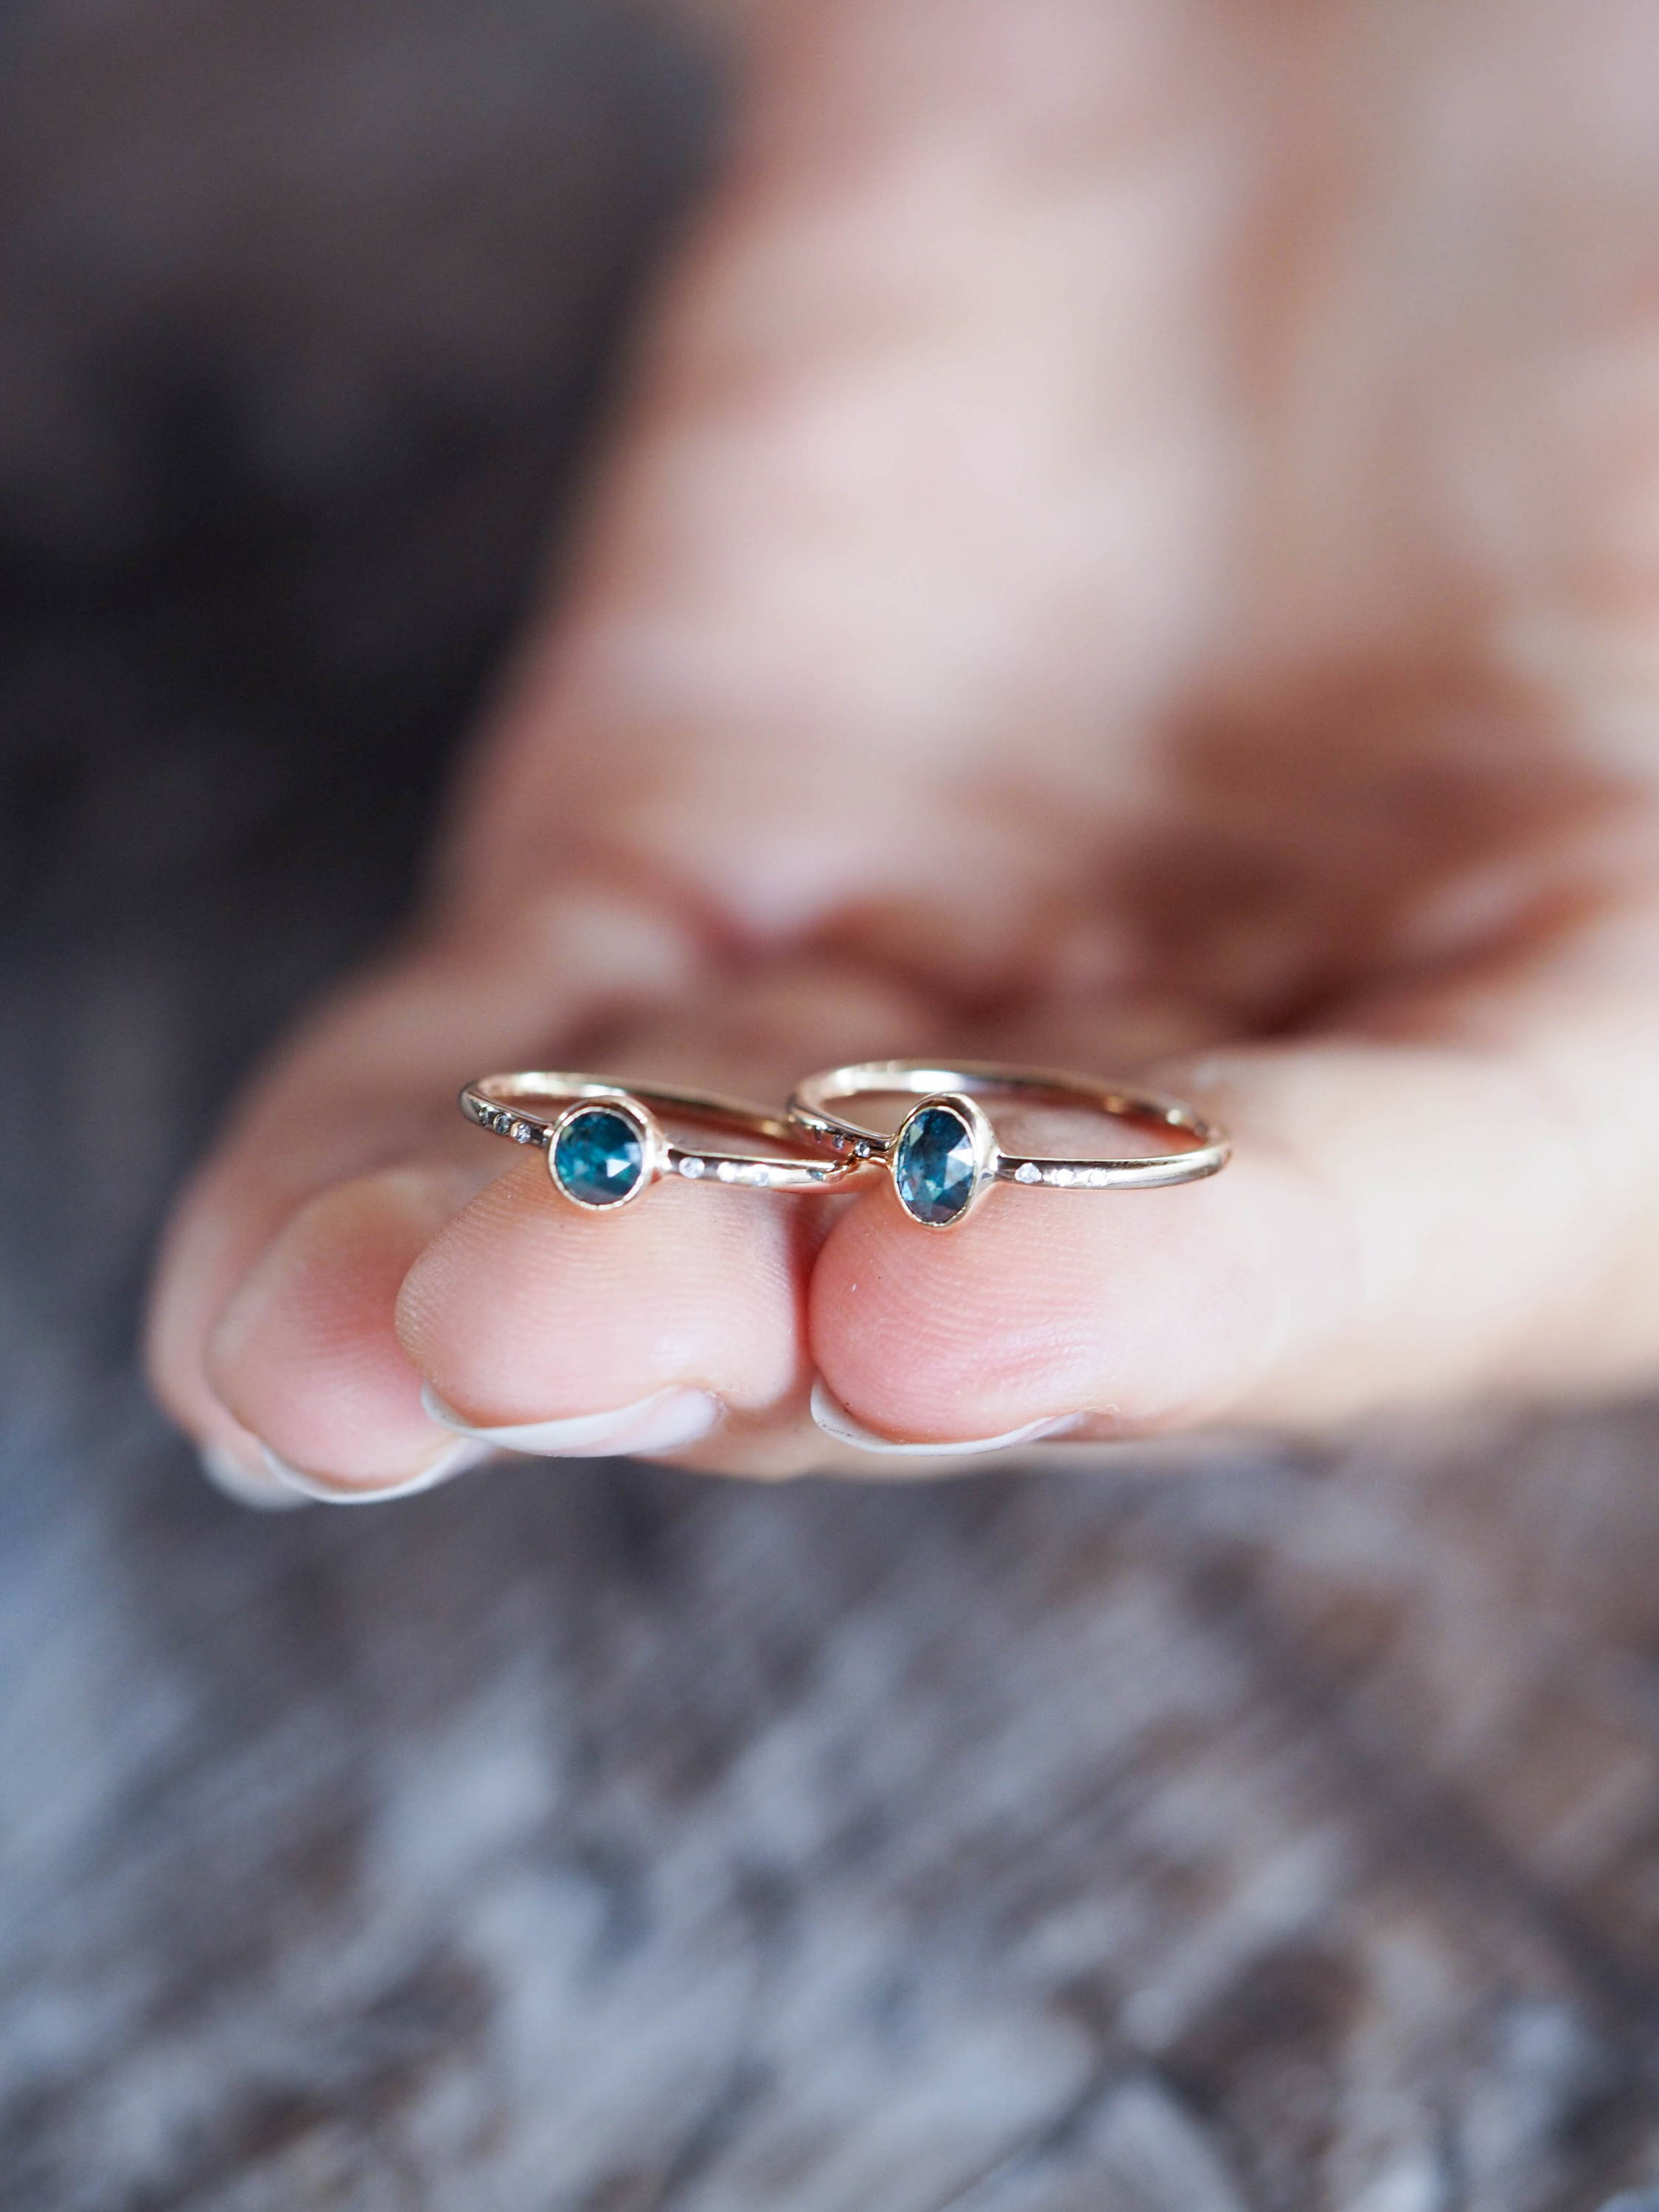 Two blue diamond rings in ethical gold